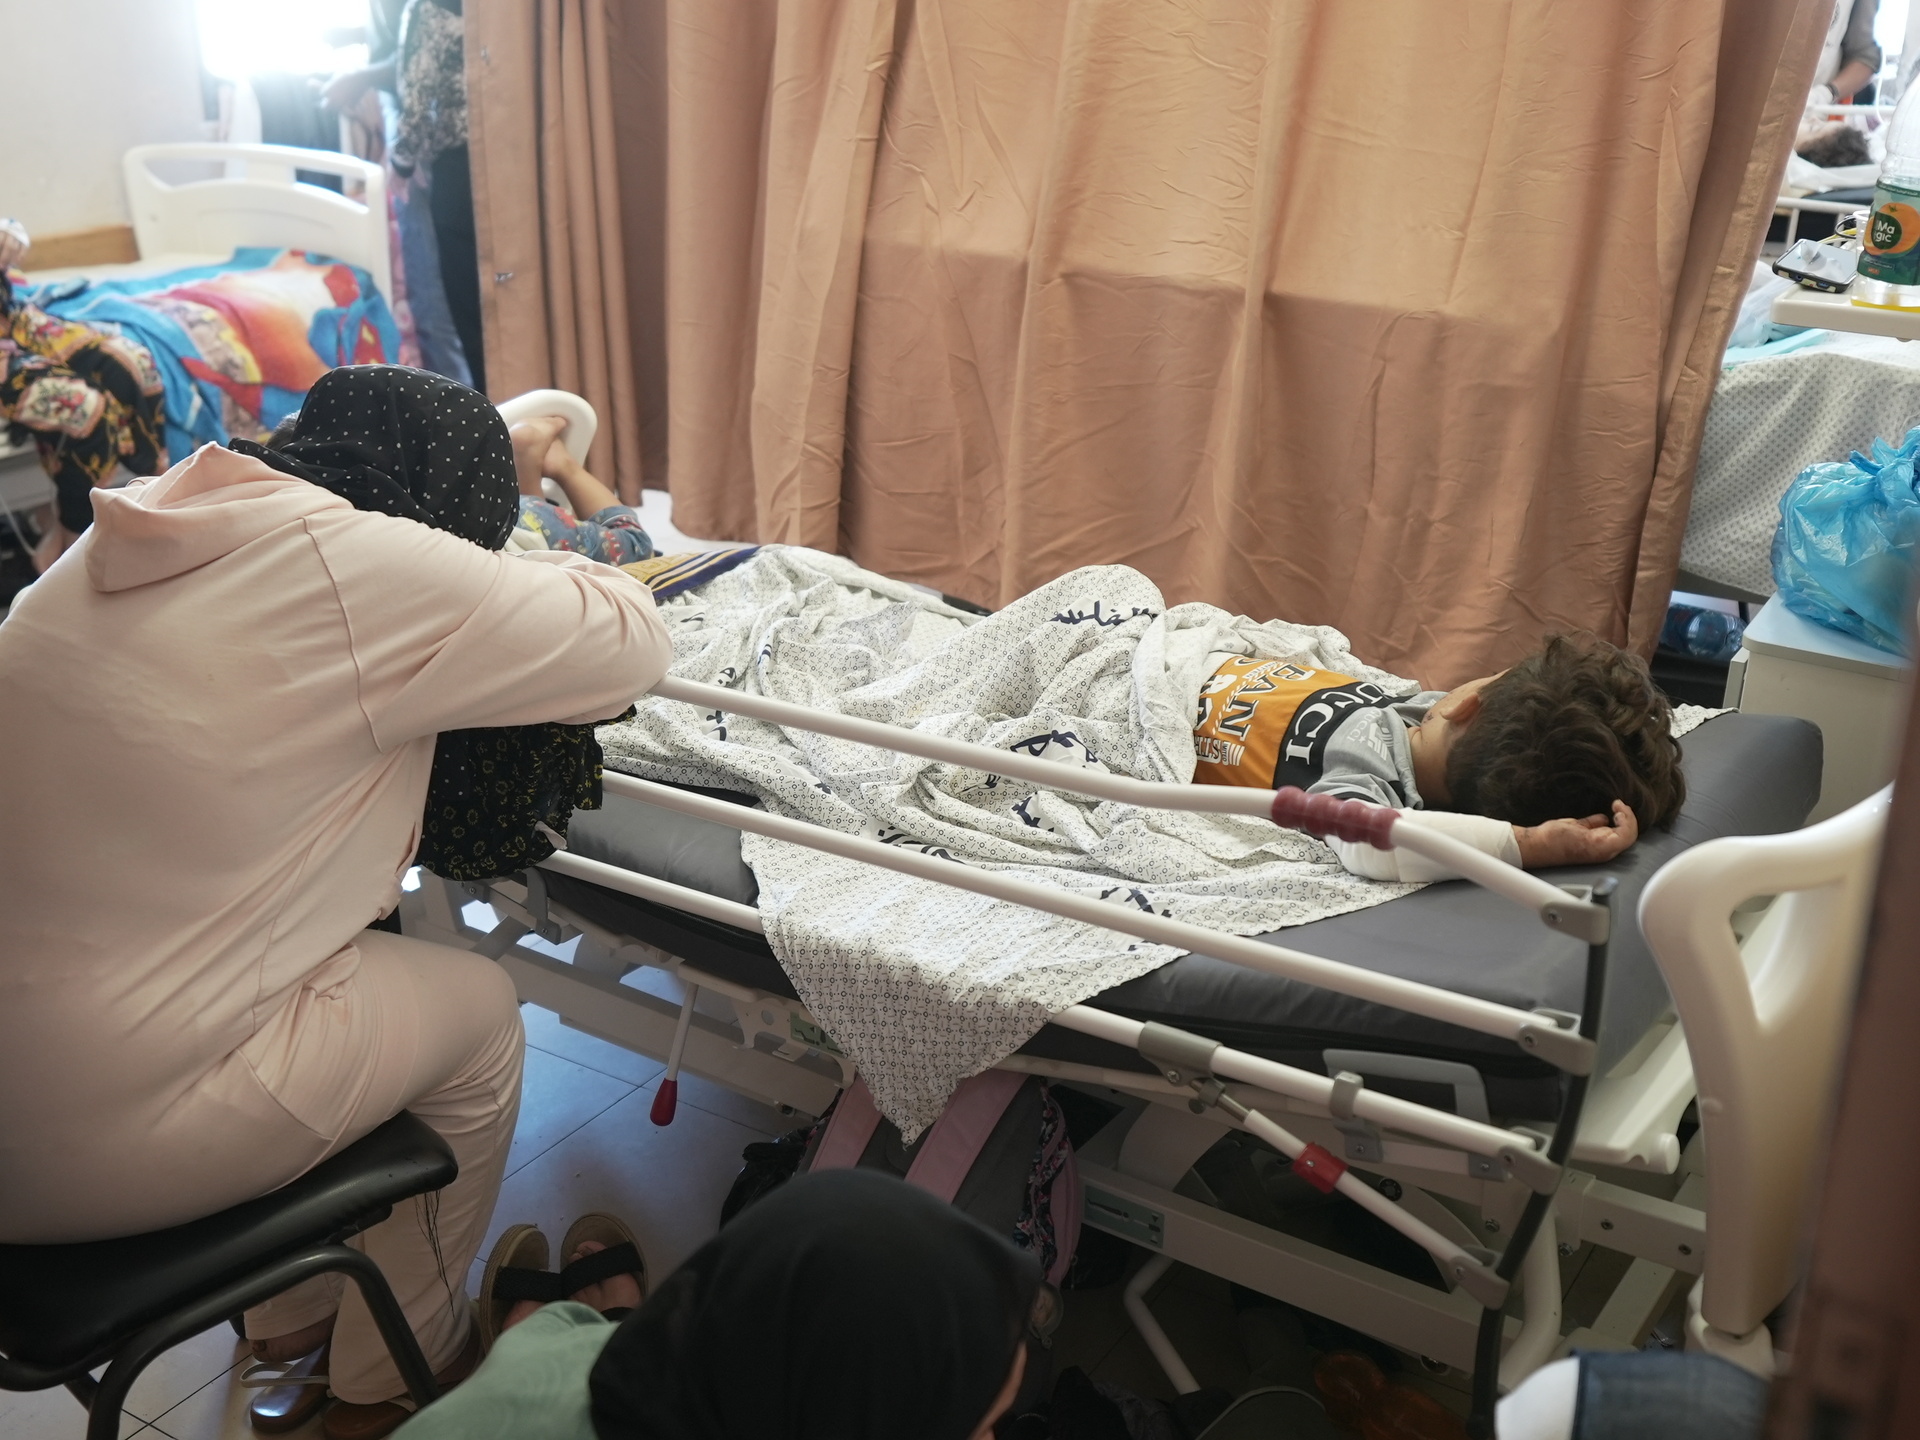 Woman with her head on her arms leaning over a hospital bed on which a child is laying.